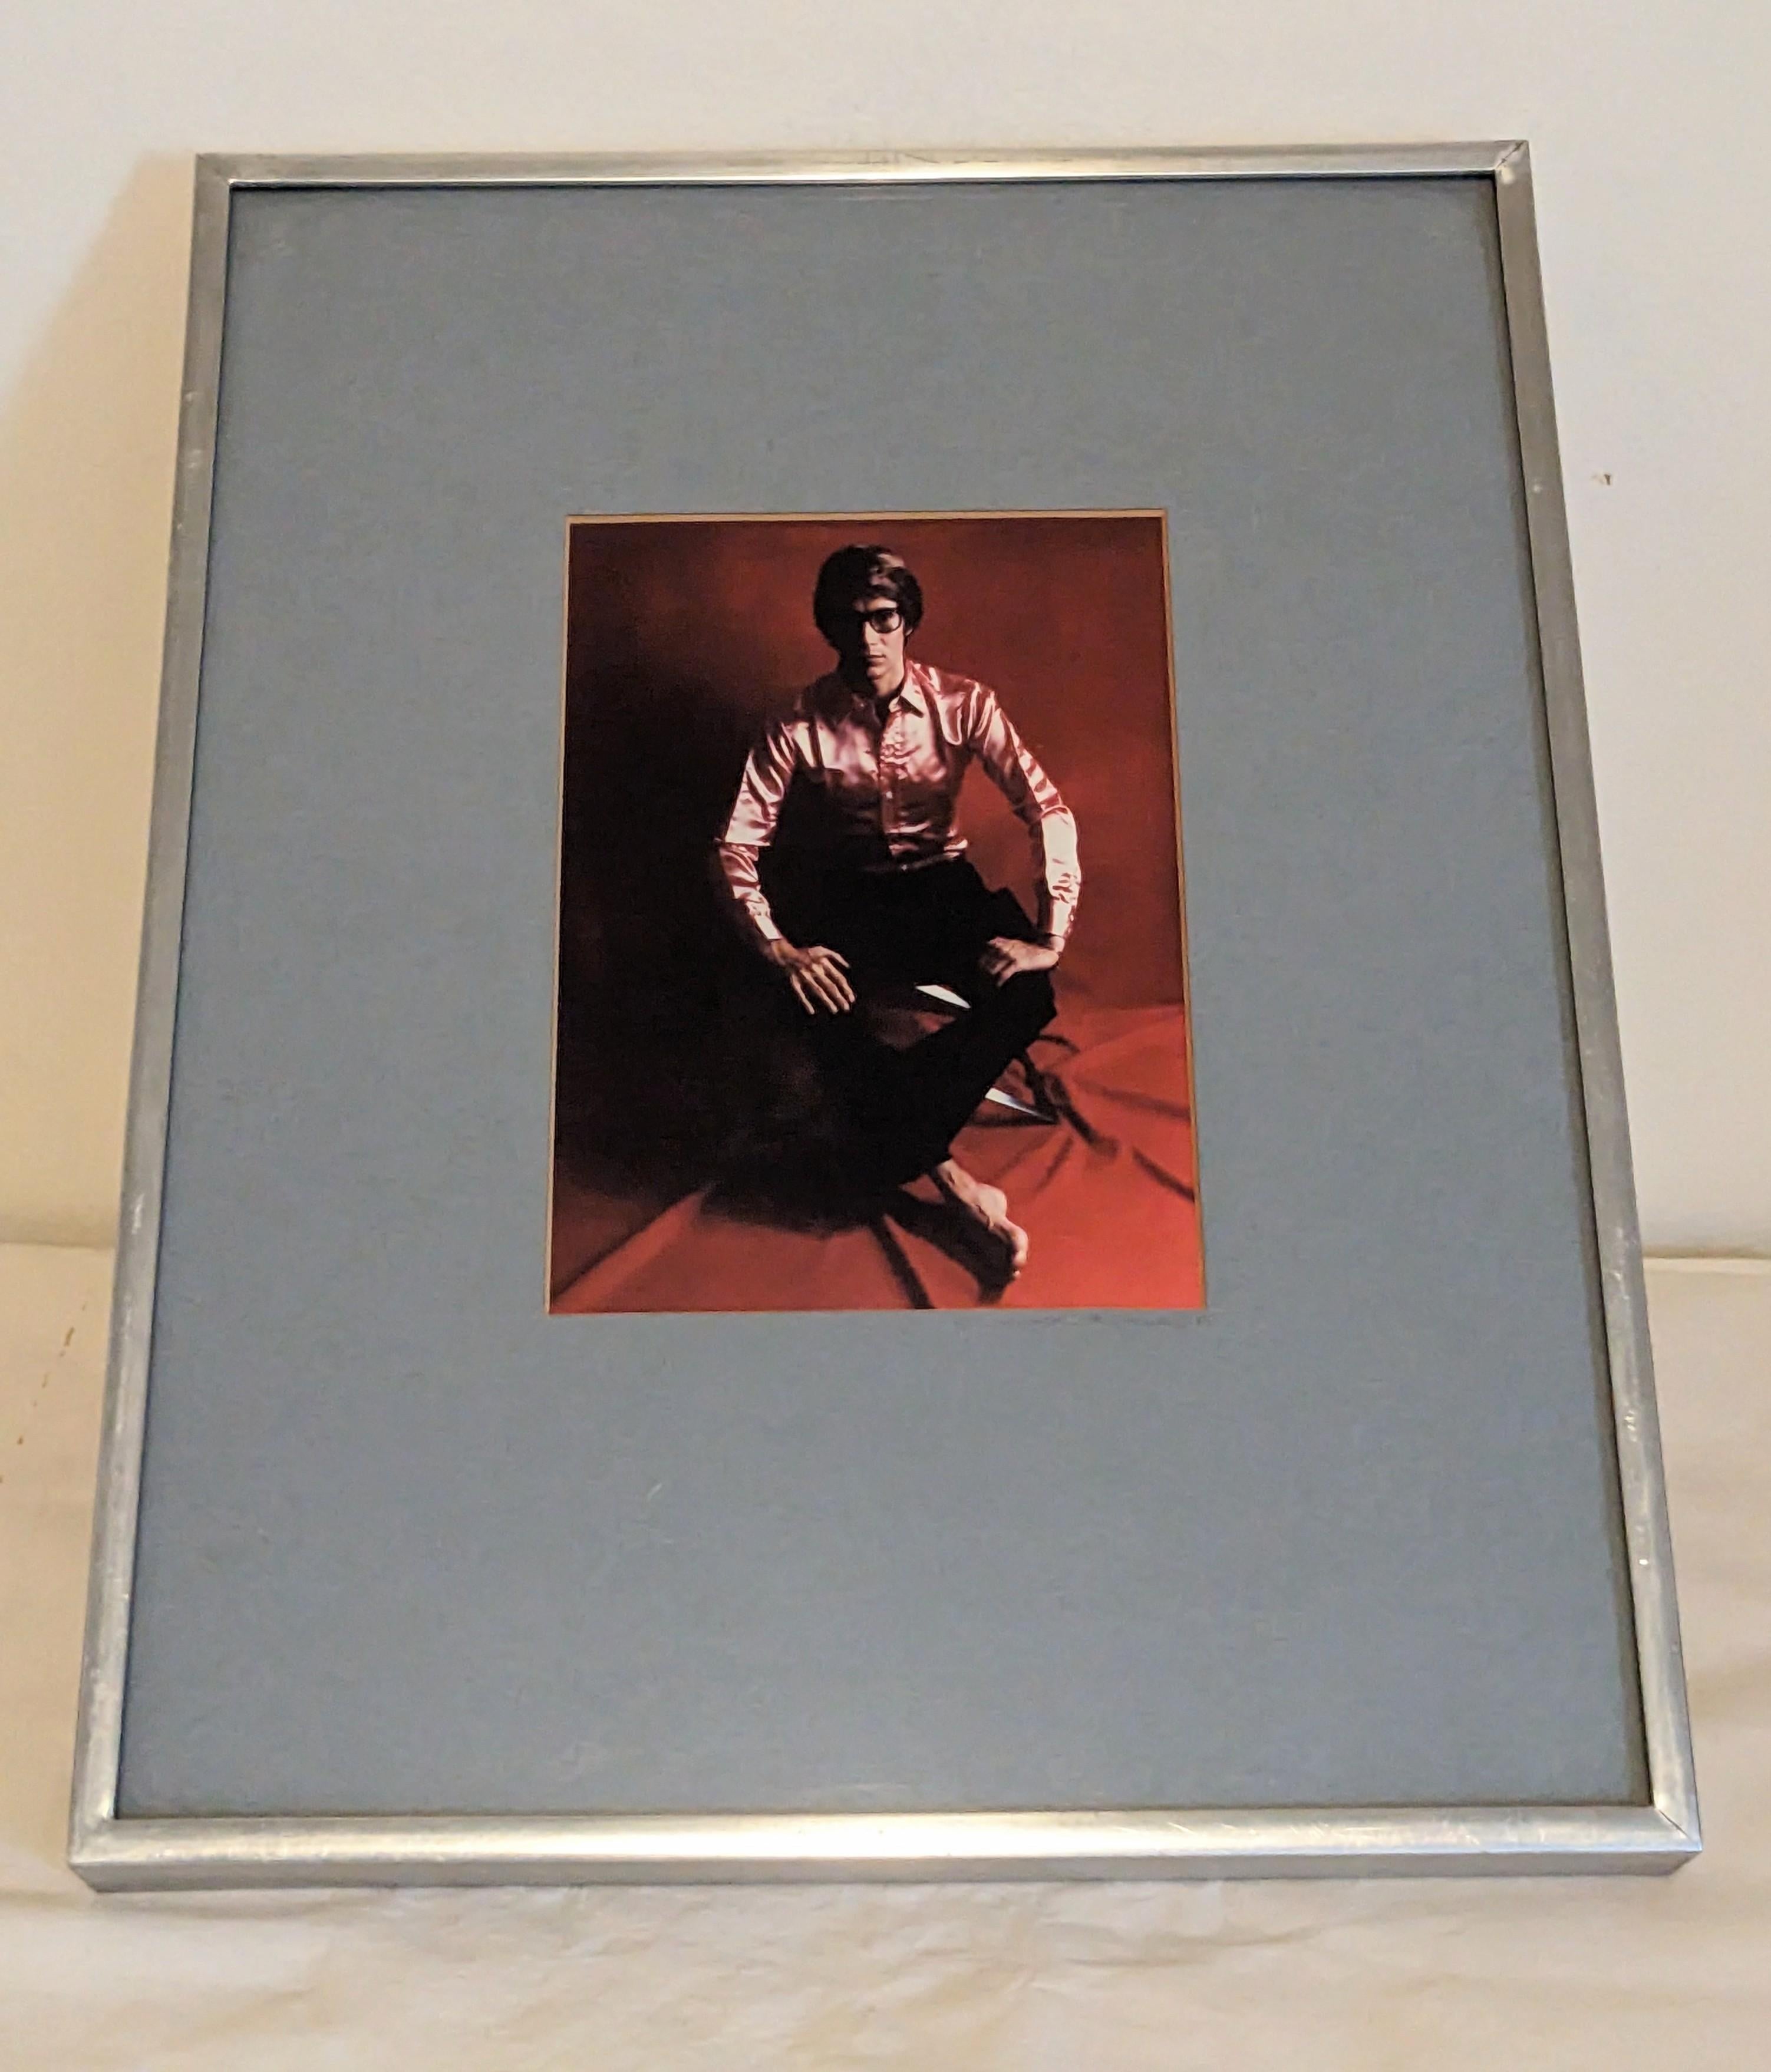 Iconic Moody Portrait of a young Yves Saint Laurent photographed and signed by Marie Cosindas in 1968. Images of this sitting by Cosindas when he was in his prime helped in launching YSL Rive Gauche brand (and licensees) with Mssr. Berge at the